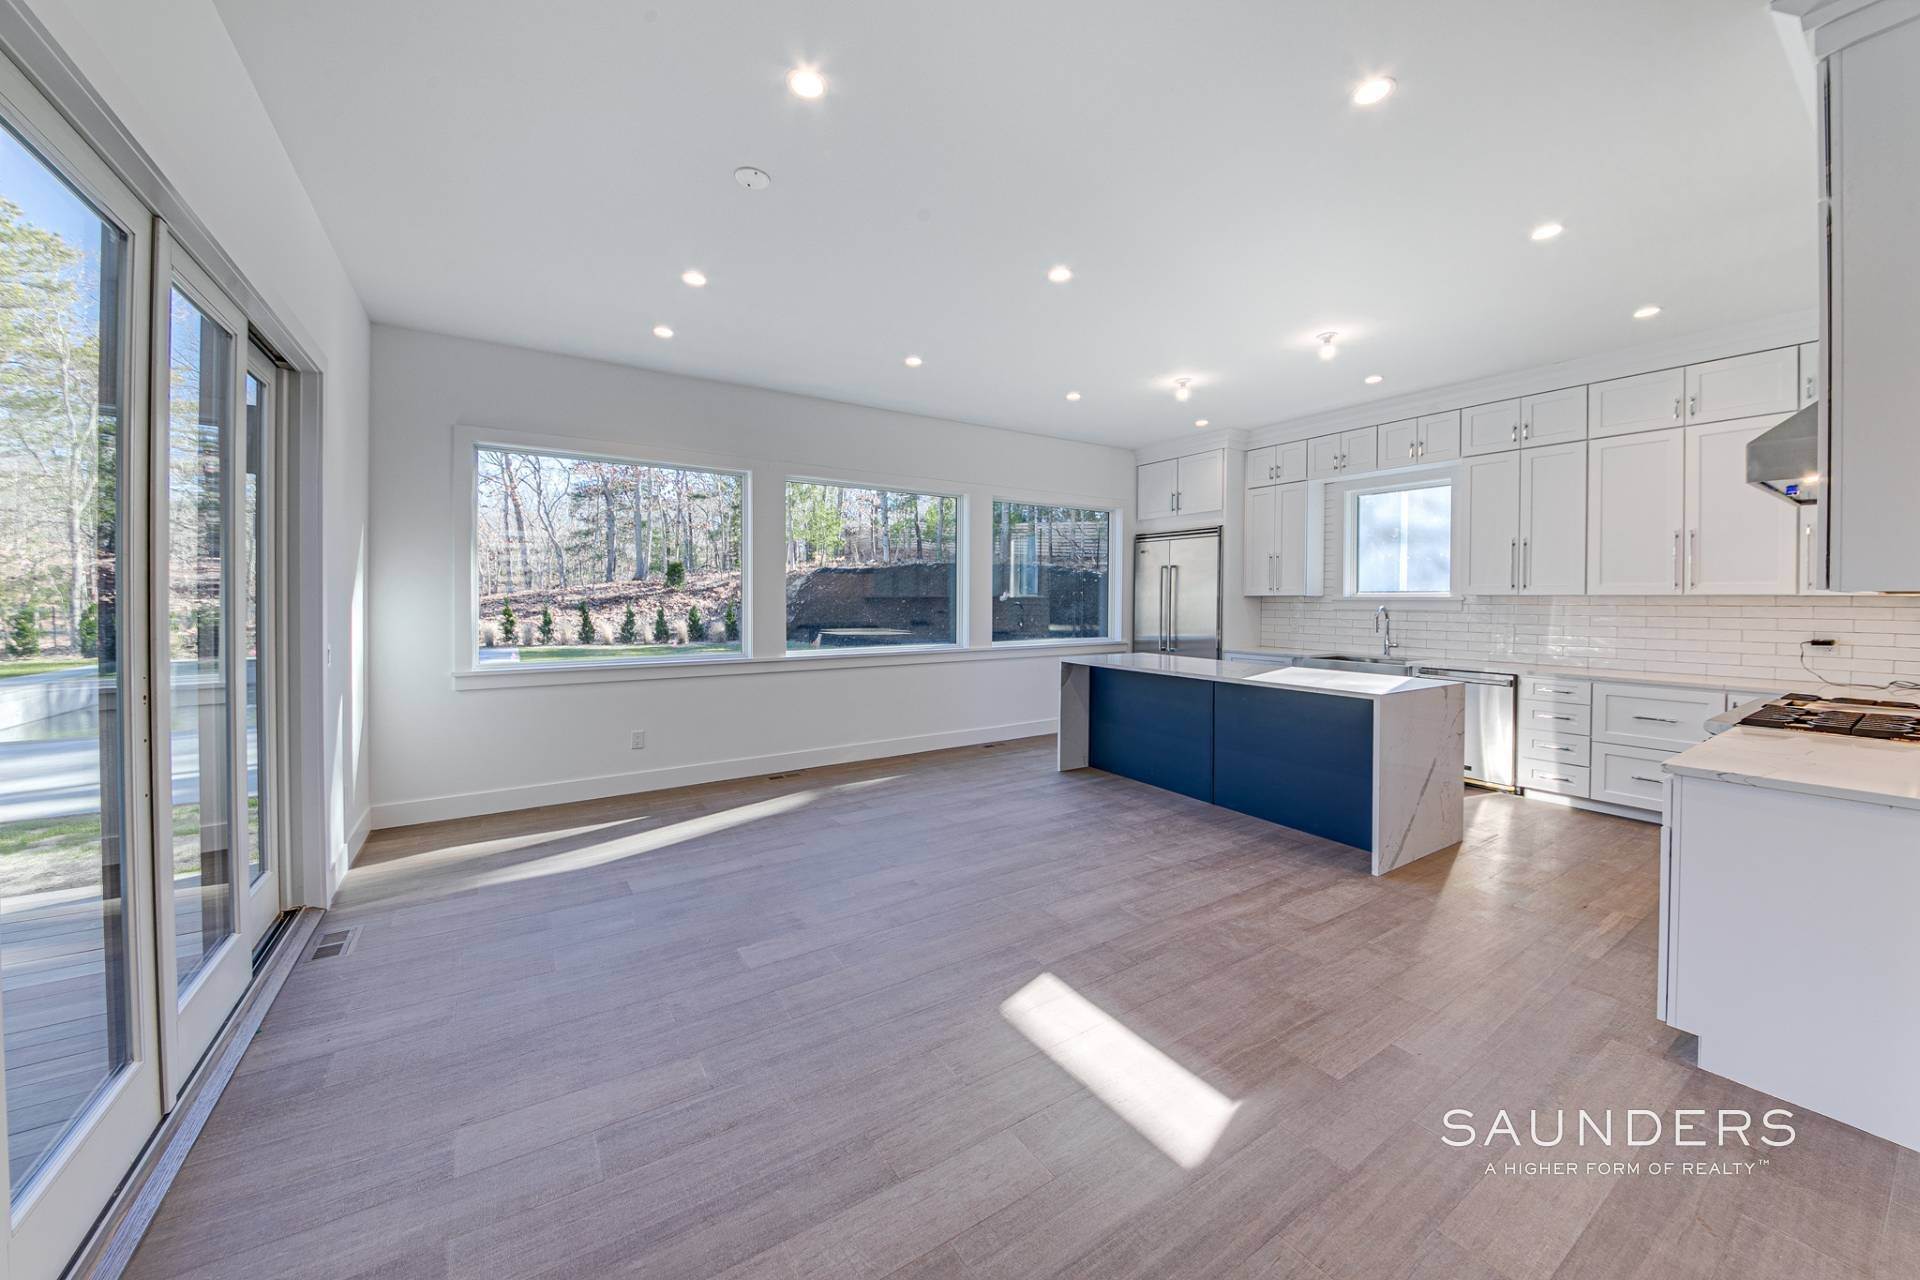 12. Single Family Homes for Sale at Unsurpassed Luxury And Elegance With This Brand New Construction 10 Van Scoys Path, East Hampton, NY 11937